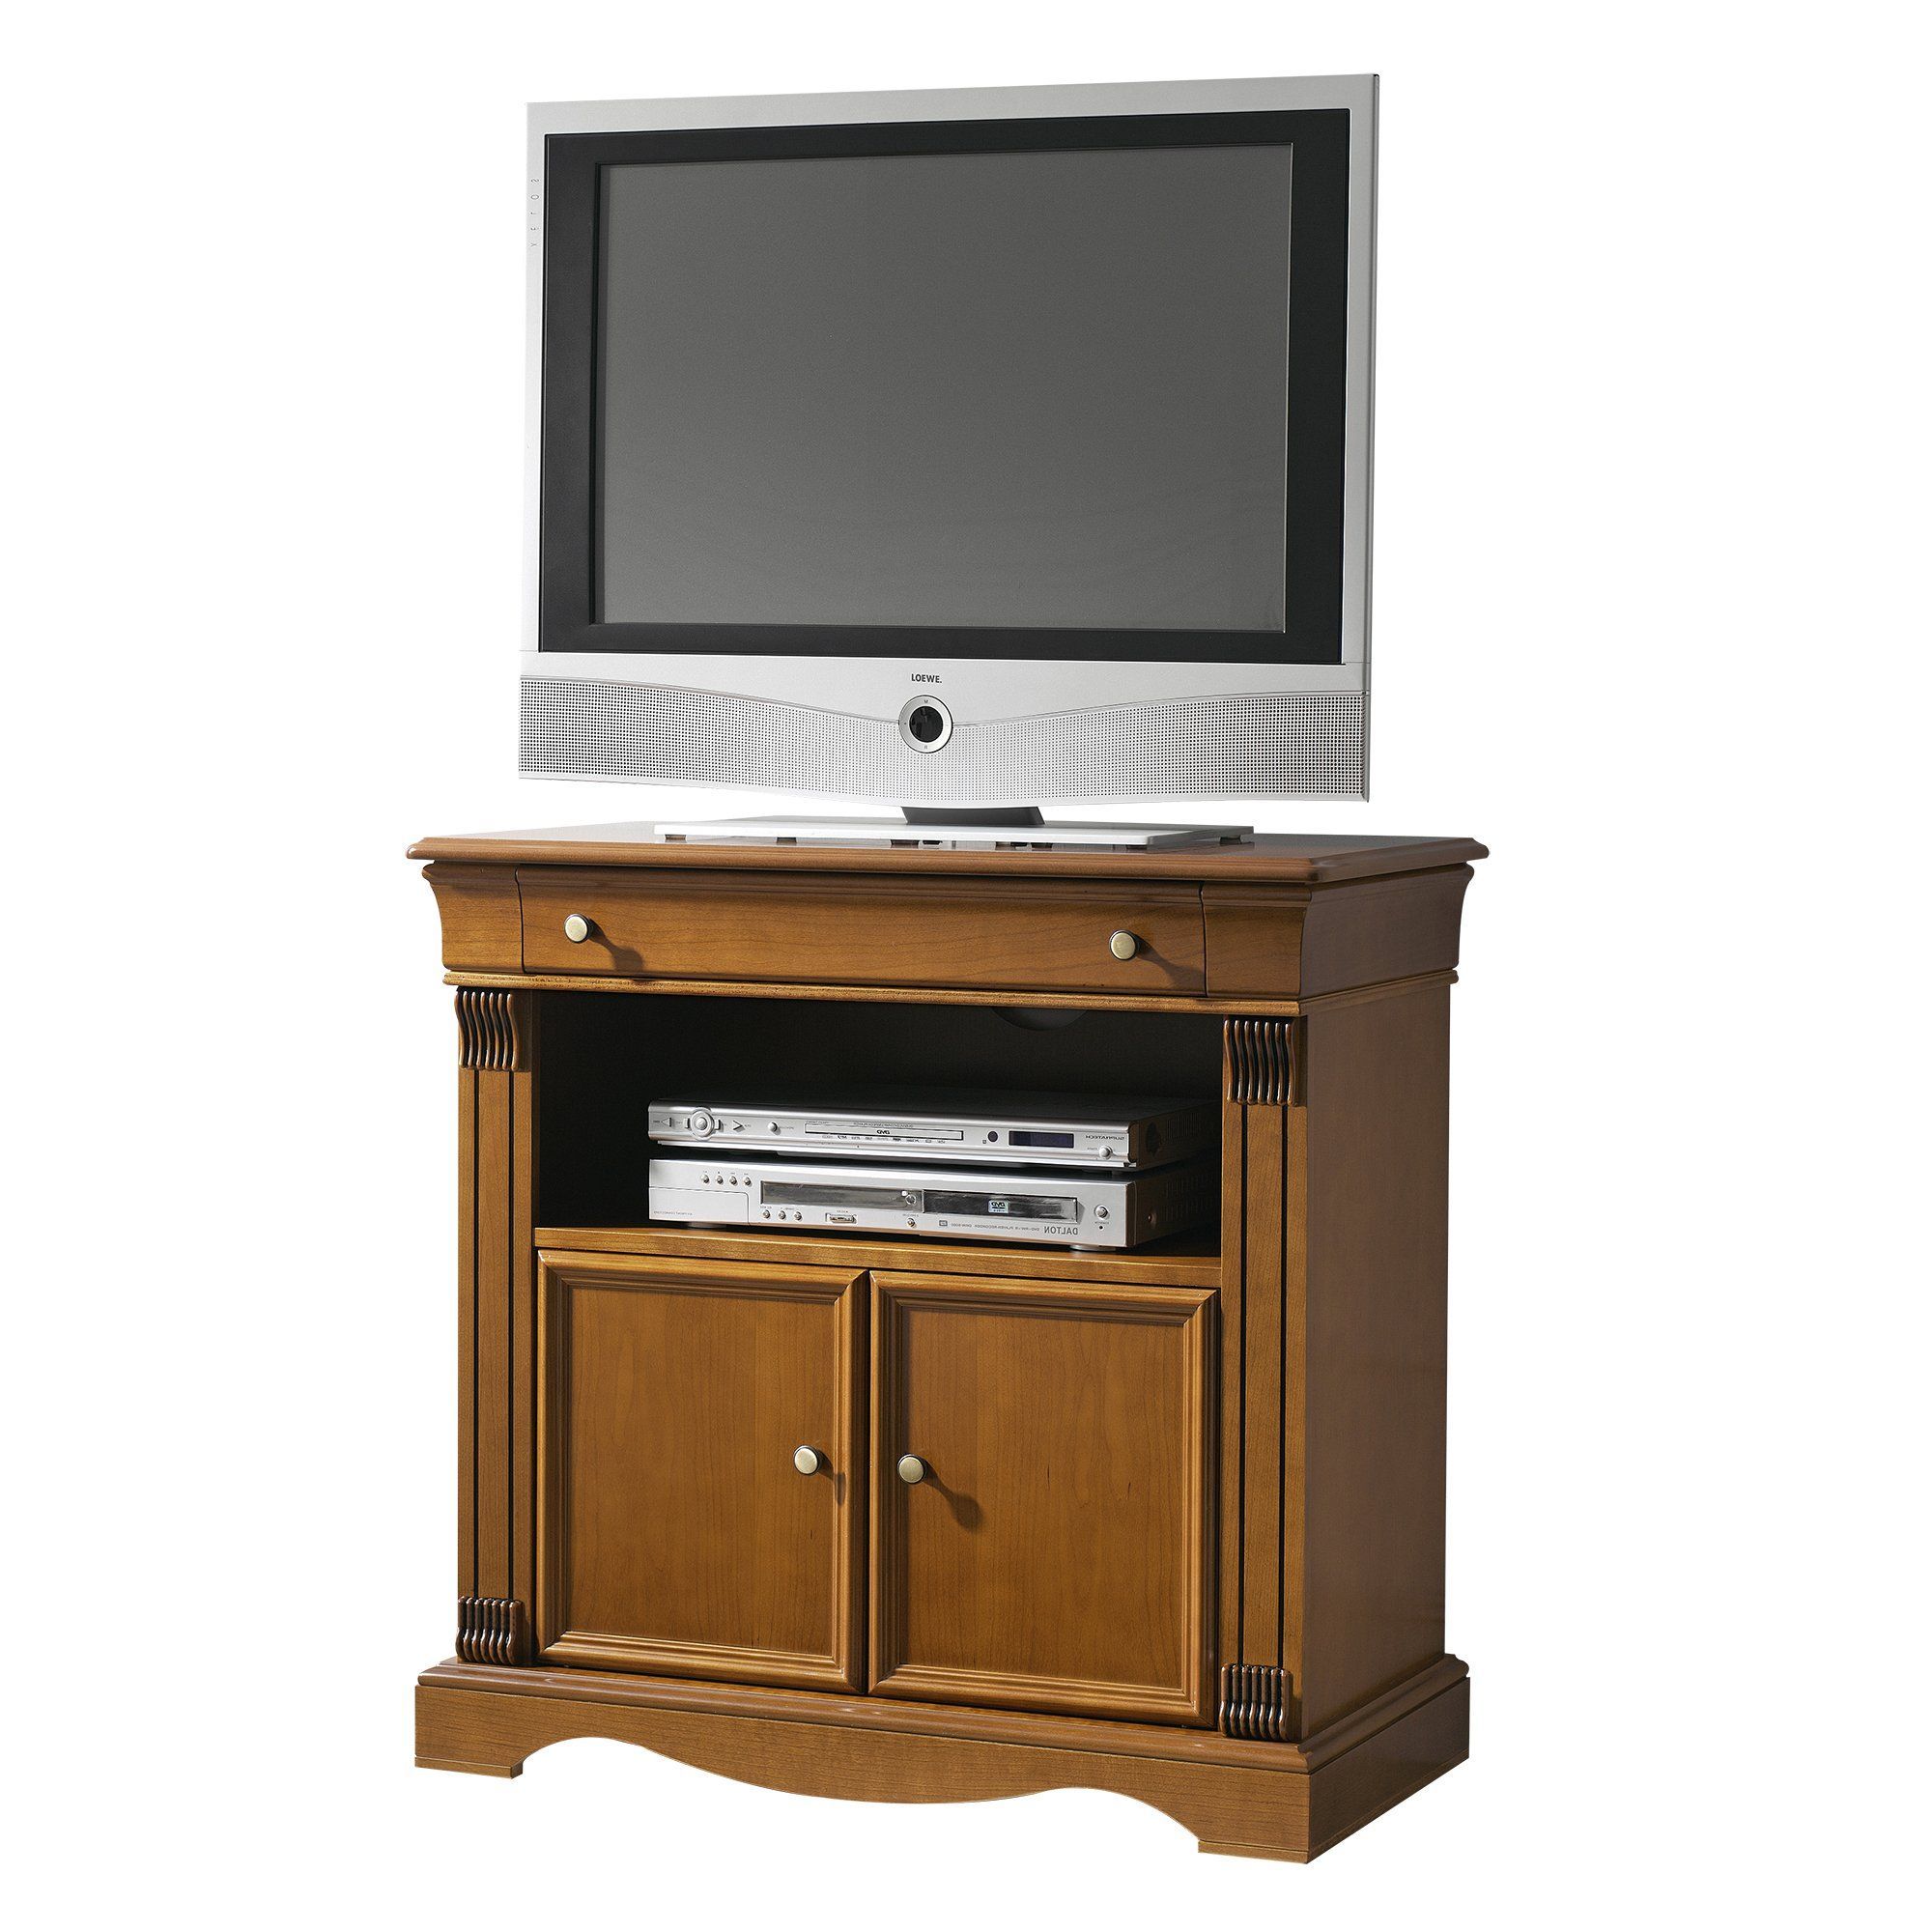 Rig 2 Cabinets 1 Drawer Solid Wood Tv Stand #woodfurniture With Upright Tv Stands (View 6 of 15)